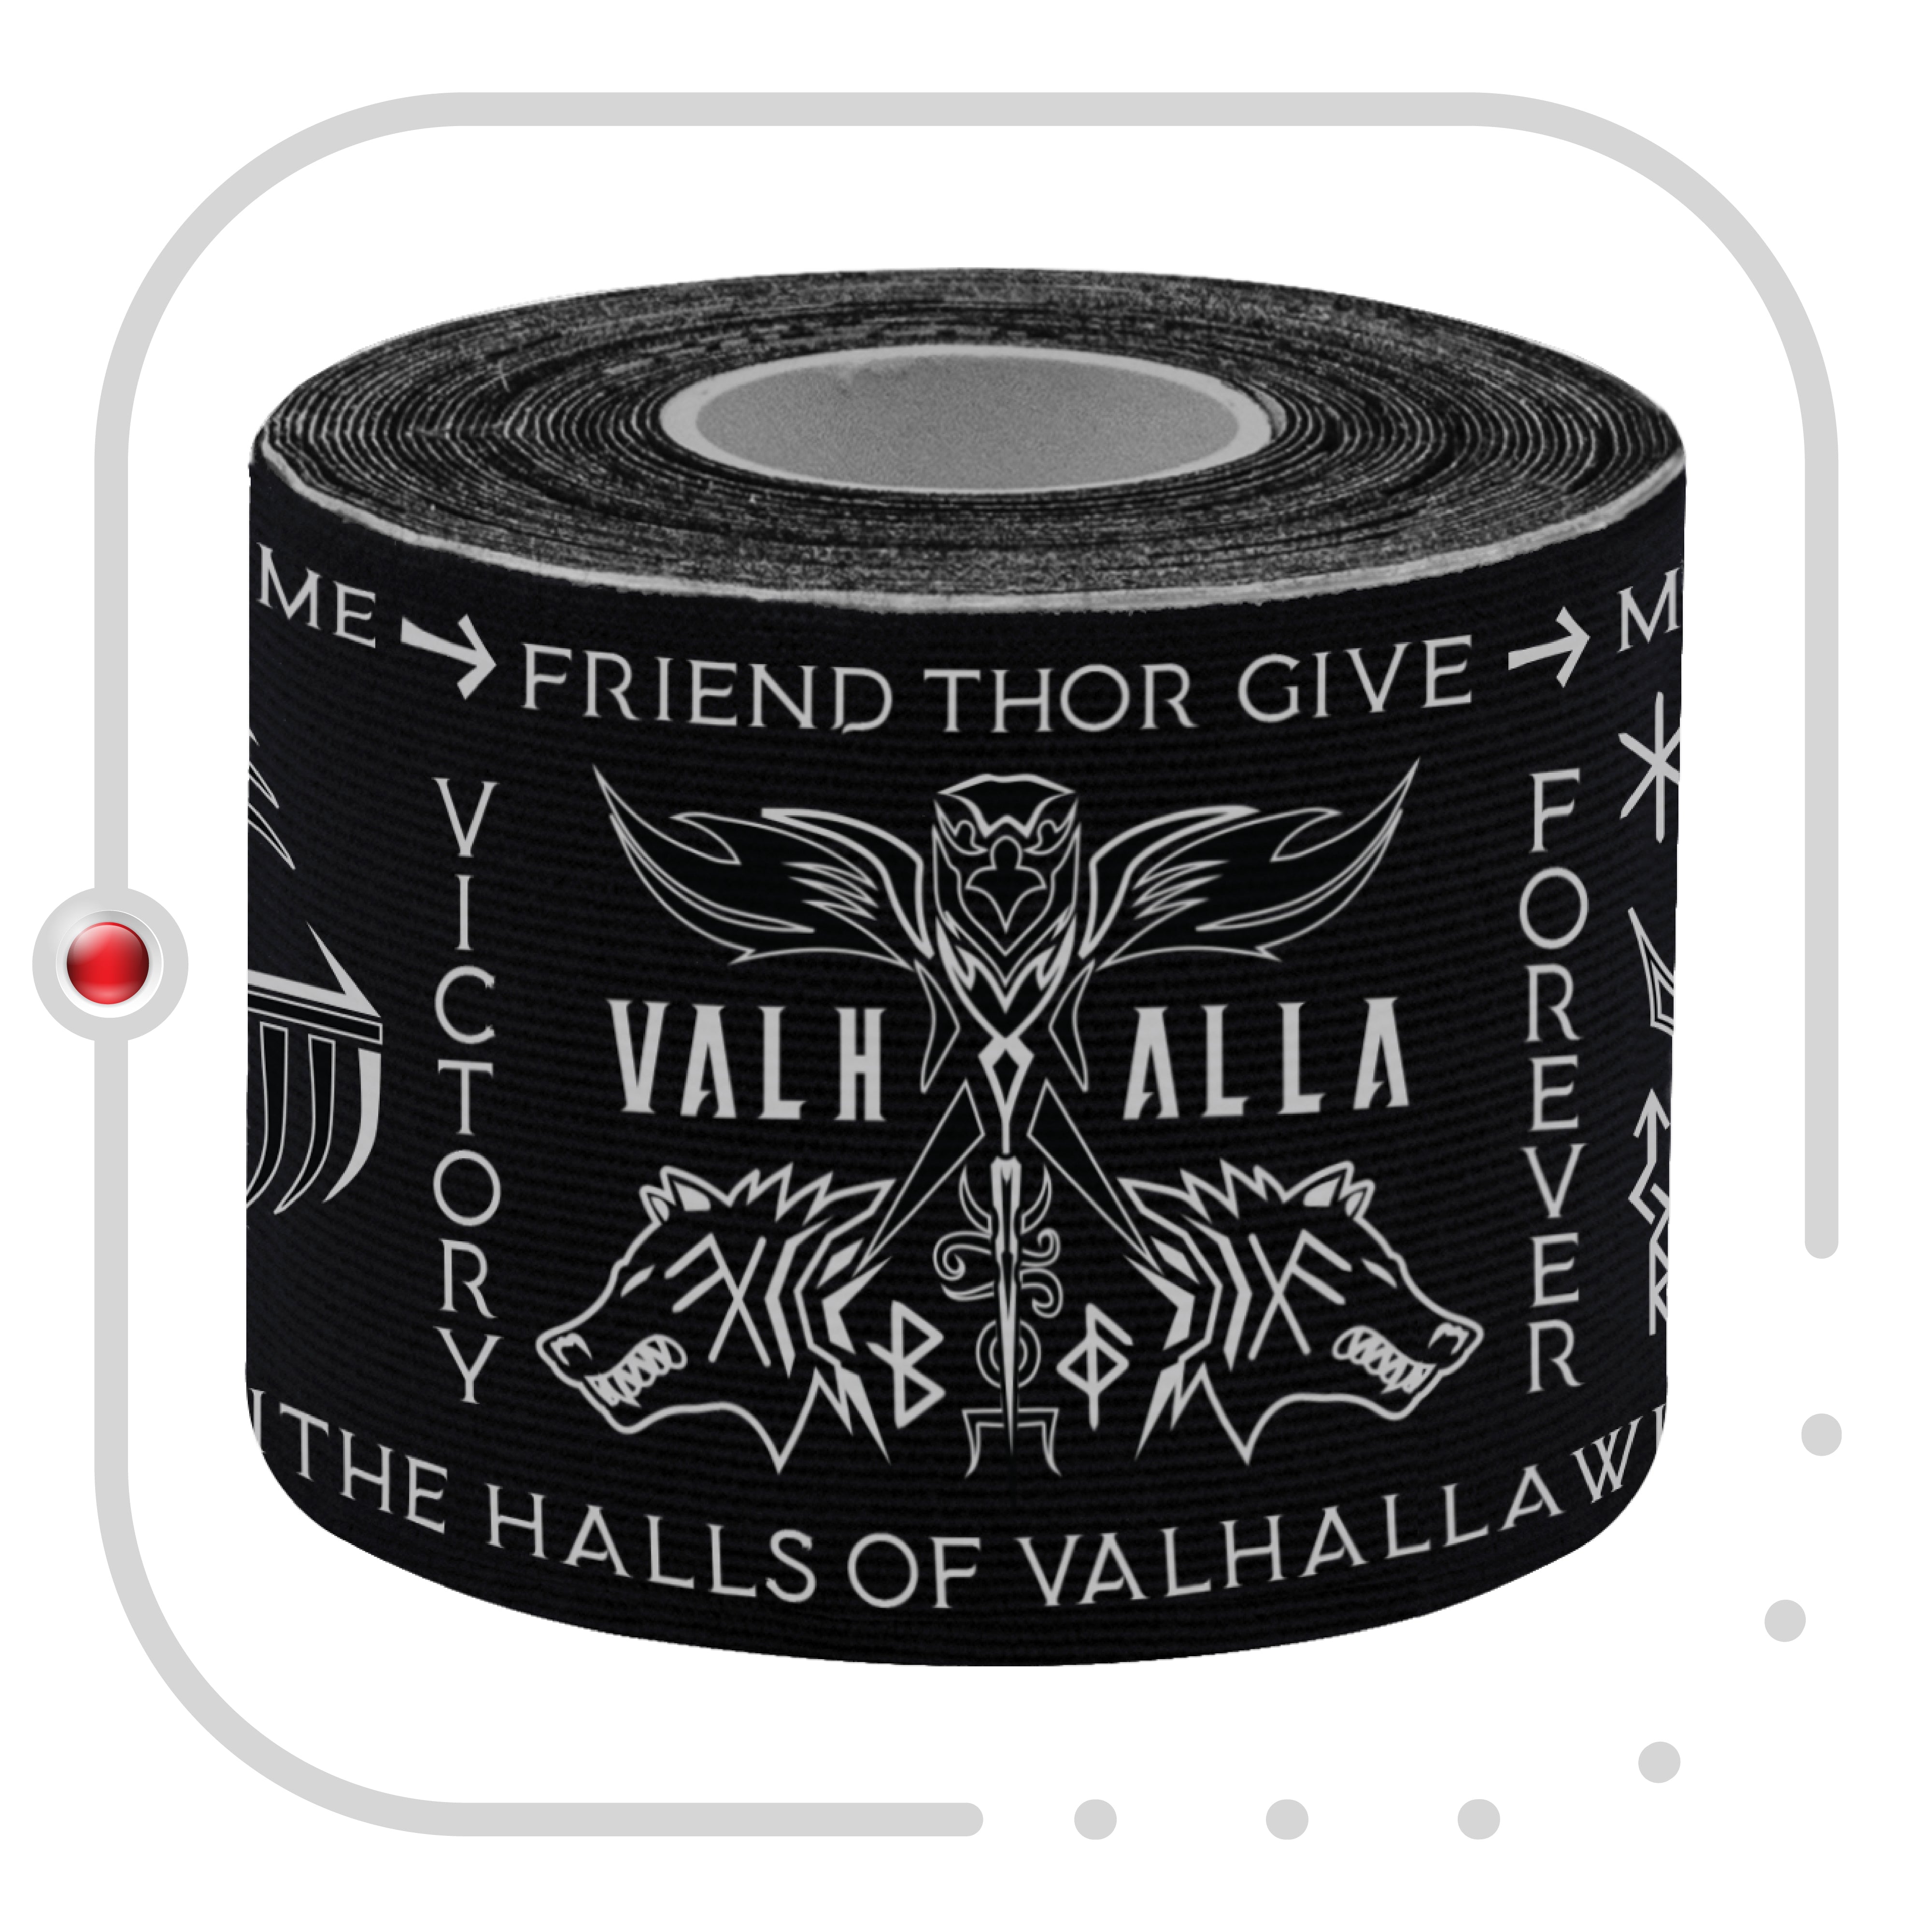 Black Kinesiology Tape Pre Cut with Dispenser - Talisman - Viking - Horizontal Design - Athletic Sports Tape - For Healing and Recovery